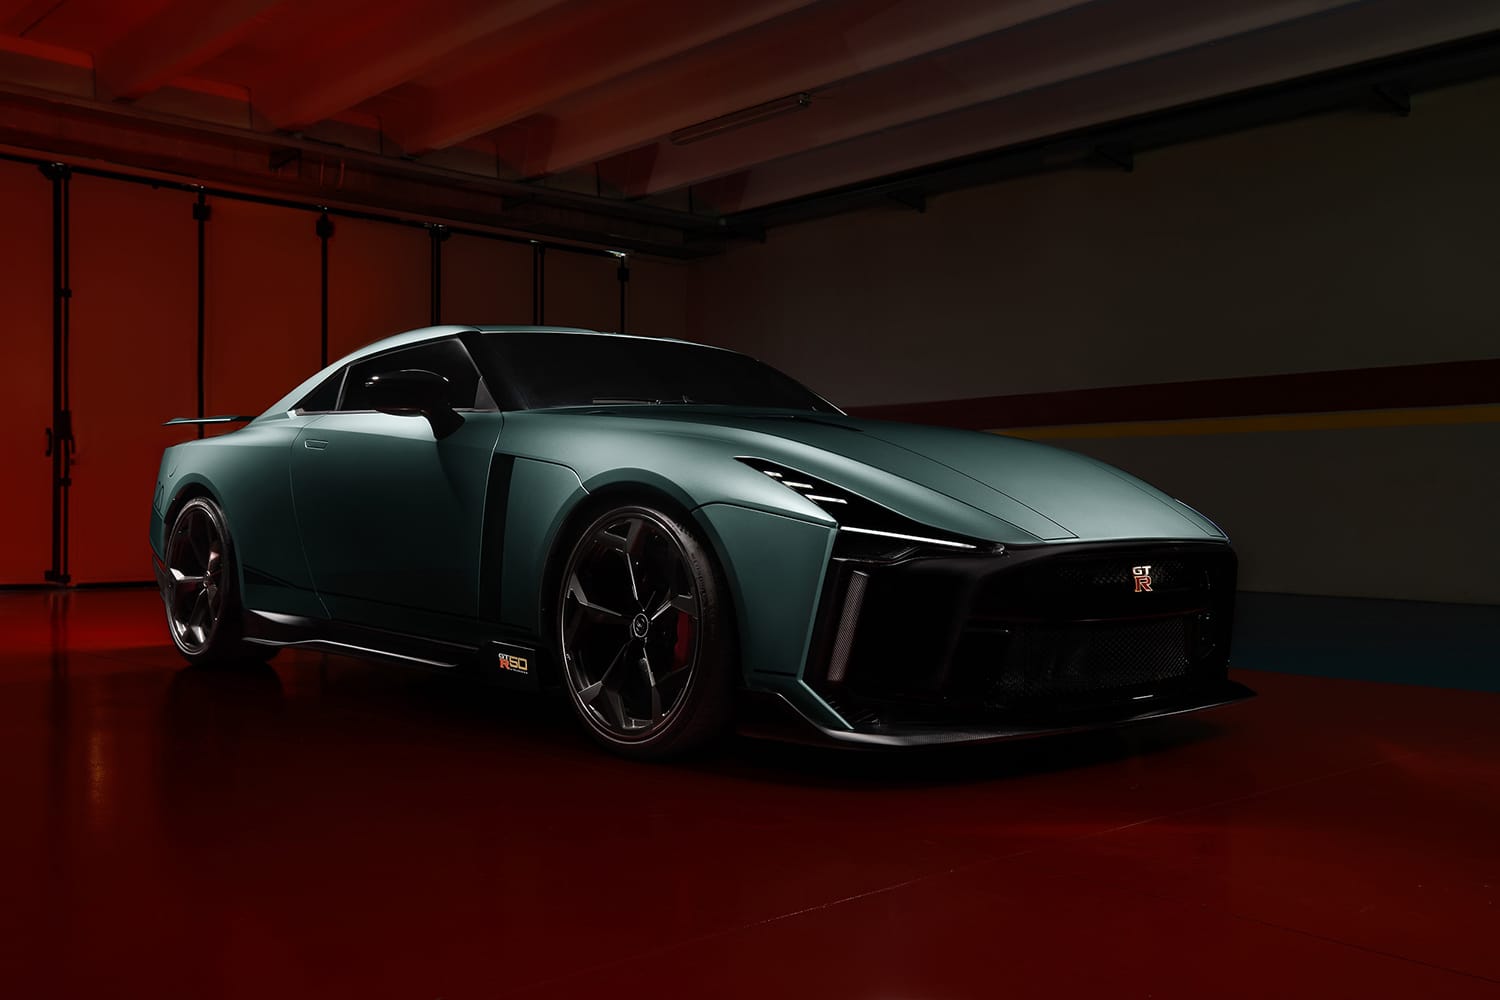 Nissan unveils the first production version of its GT-R 50 sportscar.